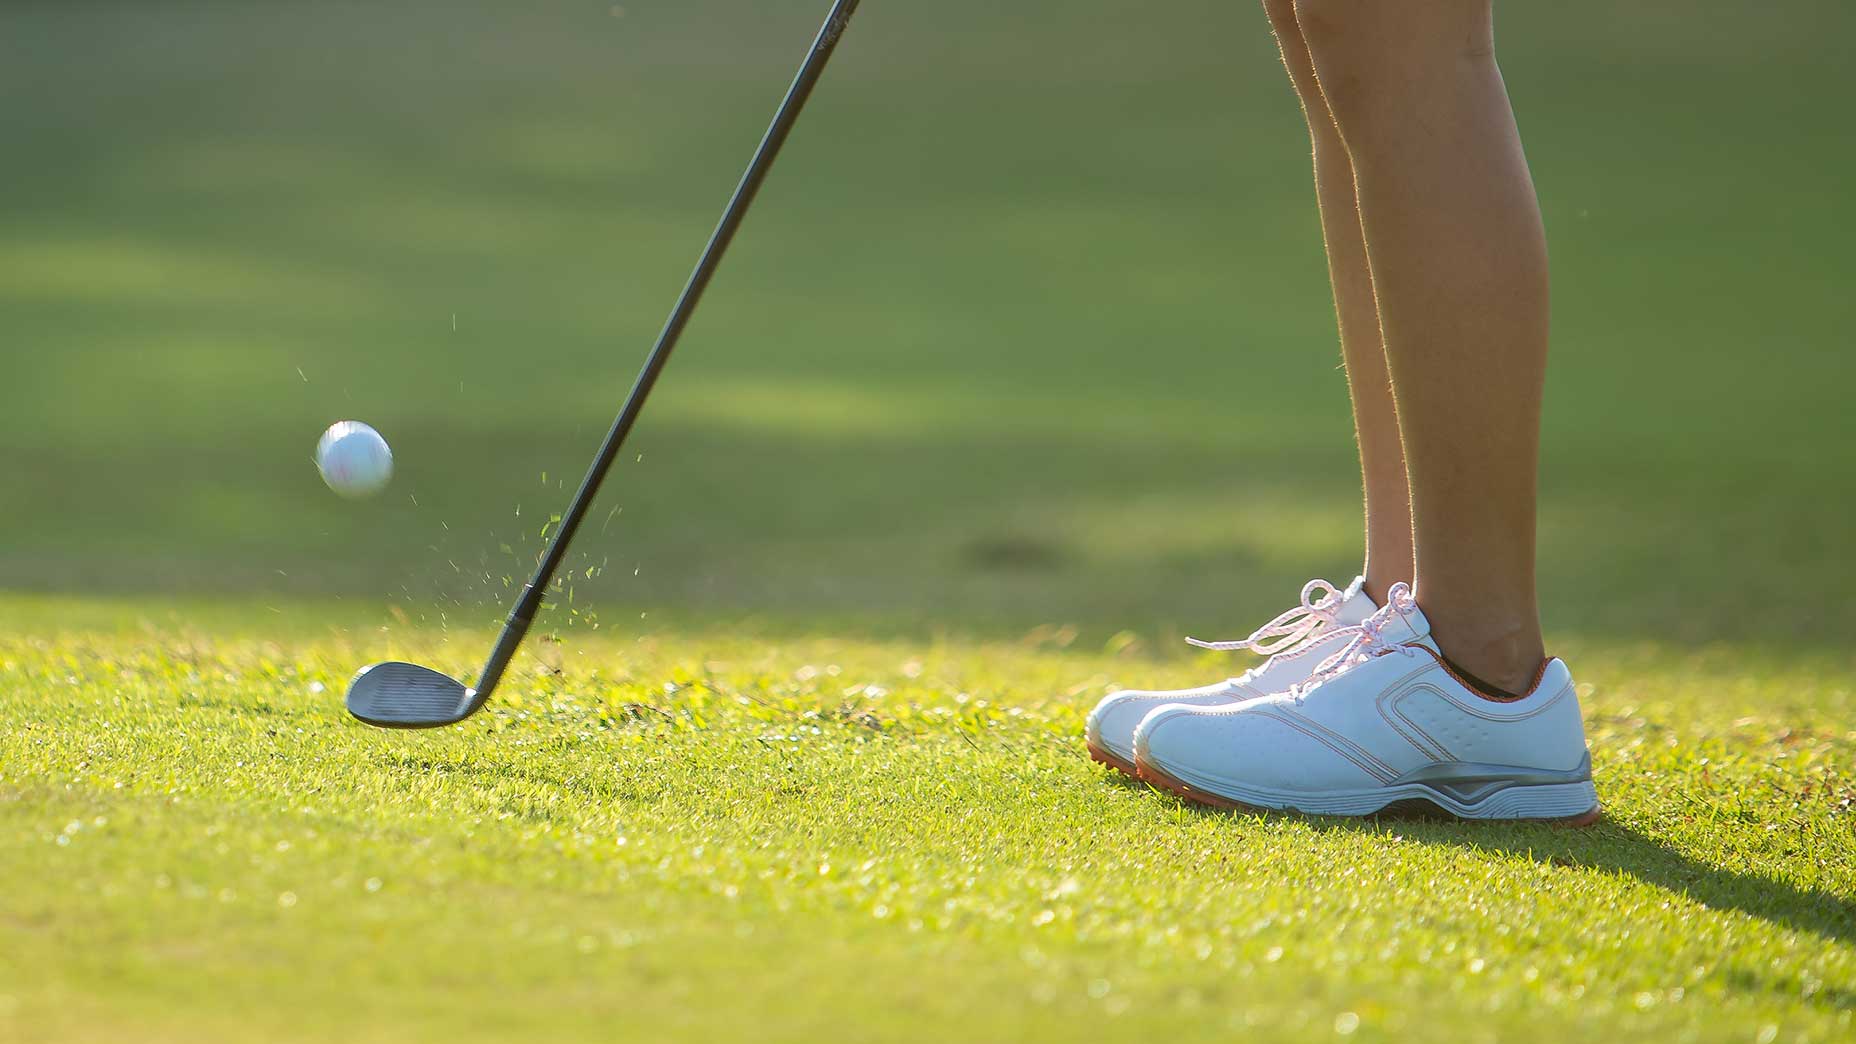 write a blog about How to improve your short game around the green